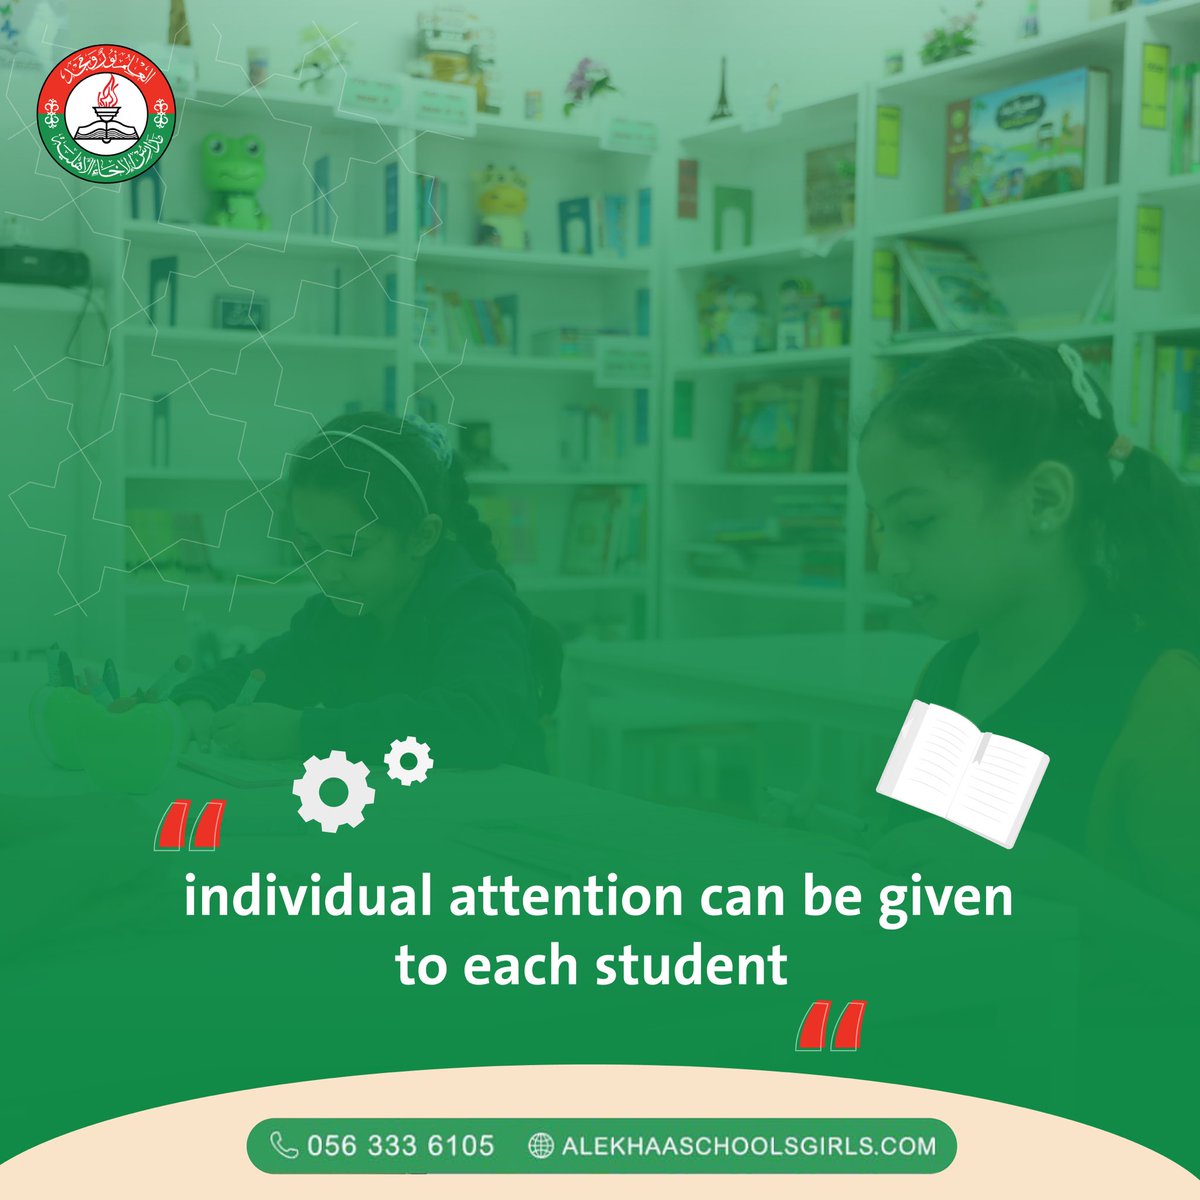 individual attention can be given to each student. 

#Ekhaa_school #Jeddah_education #jeddahschools